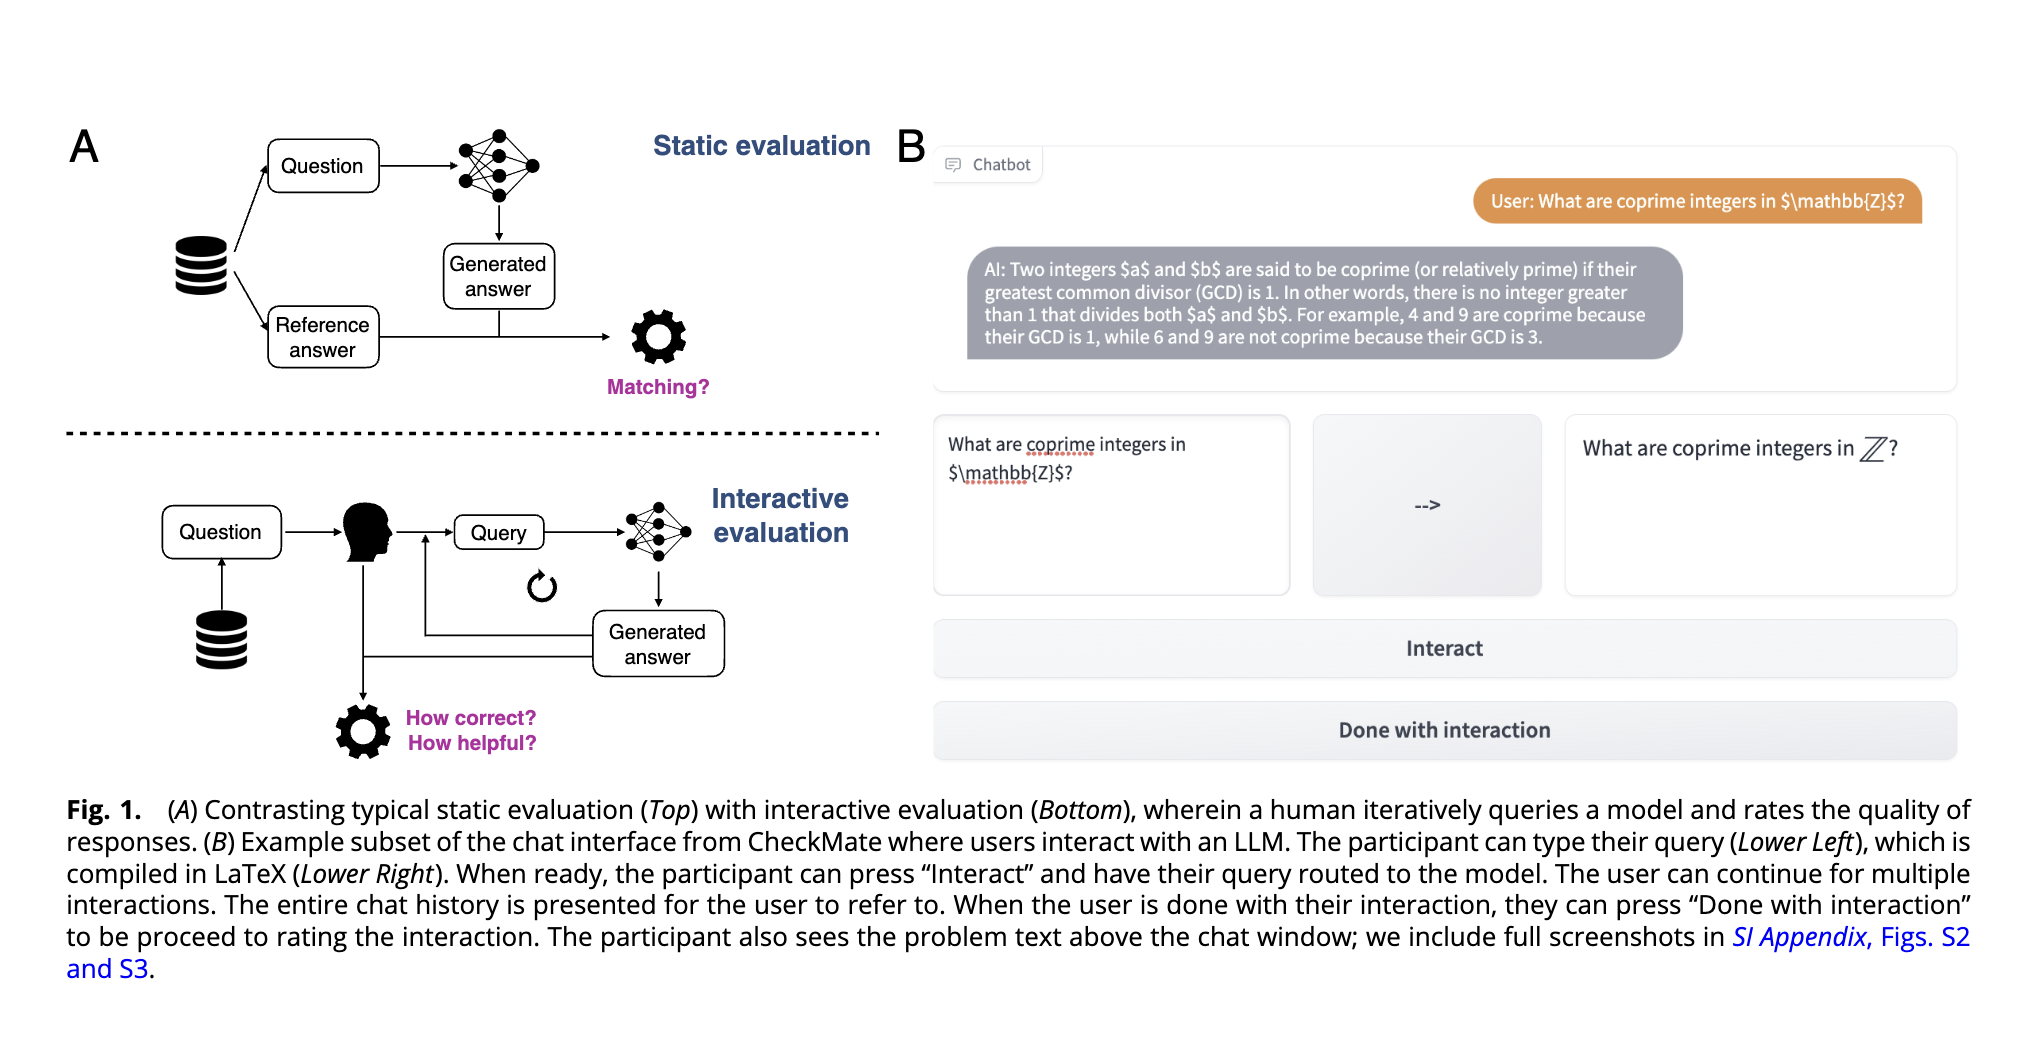  CheckMate: An Adaptable AI Platform for Evaluating Language Models by Their Interactions with Human Users